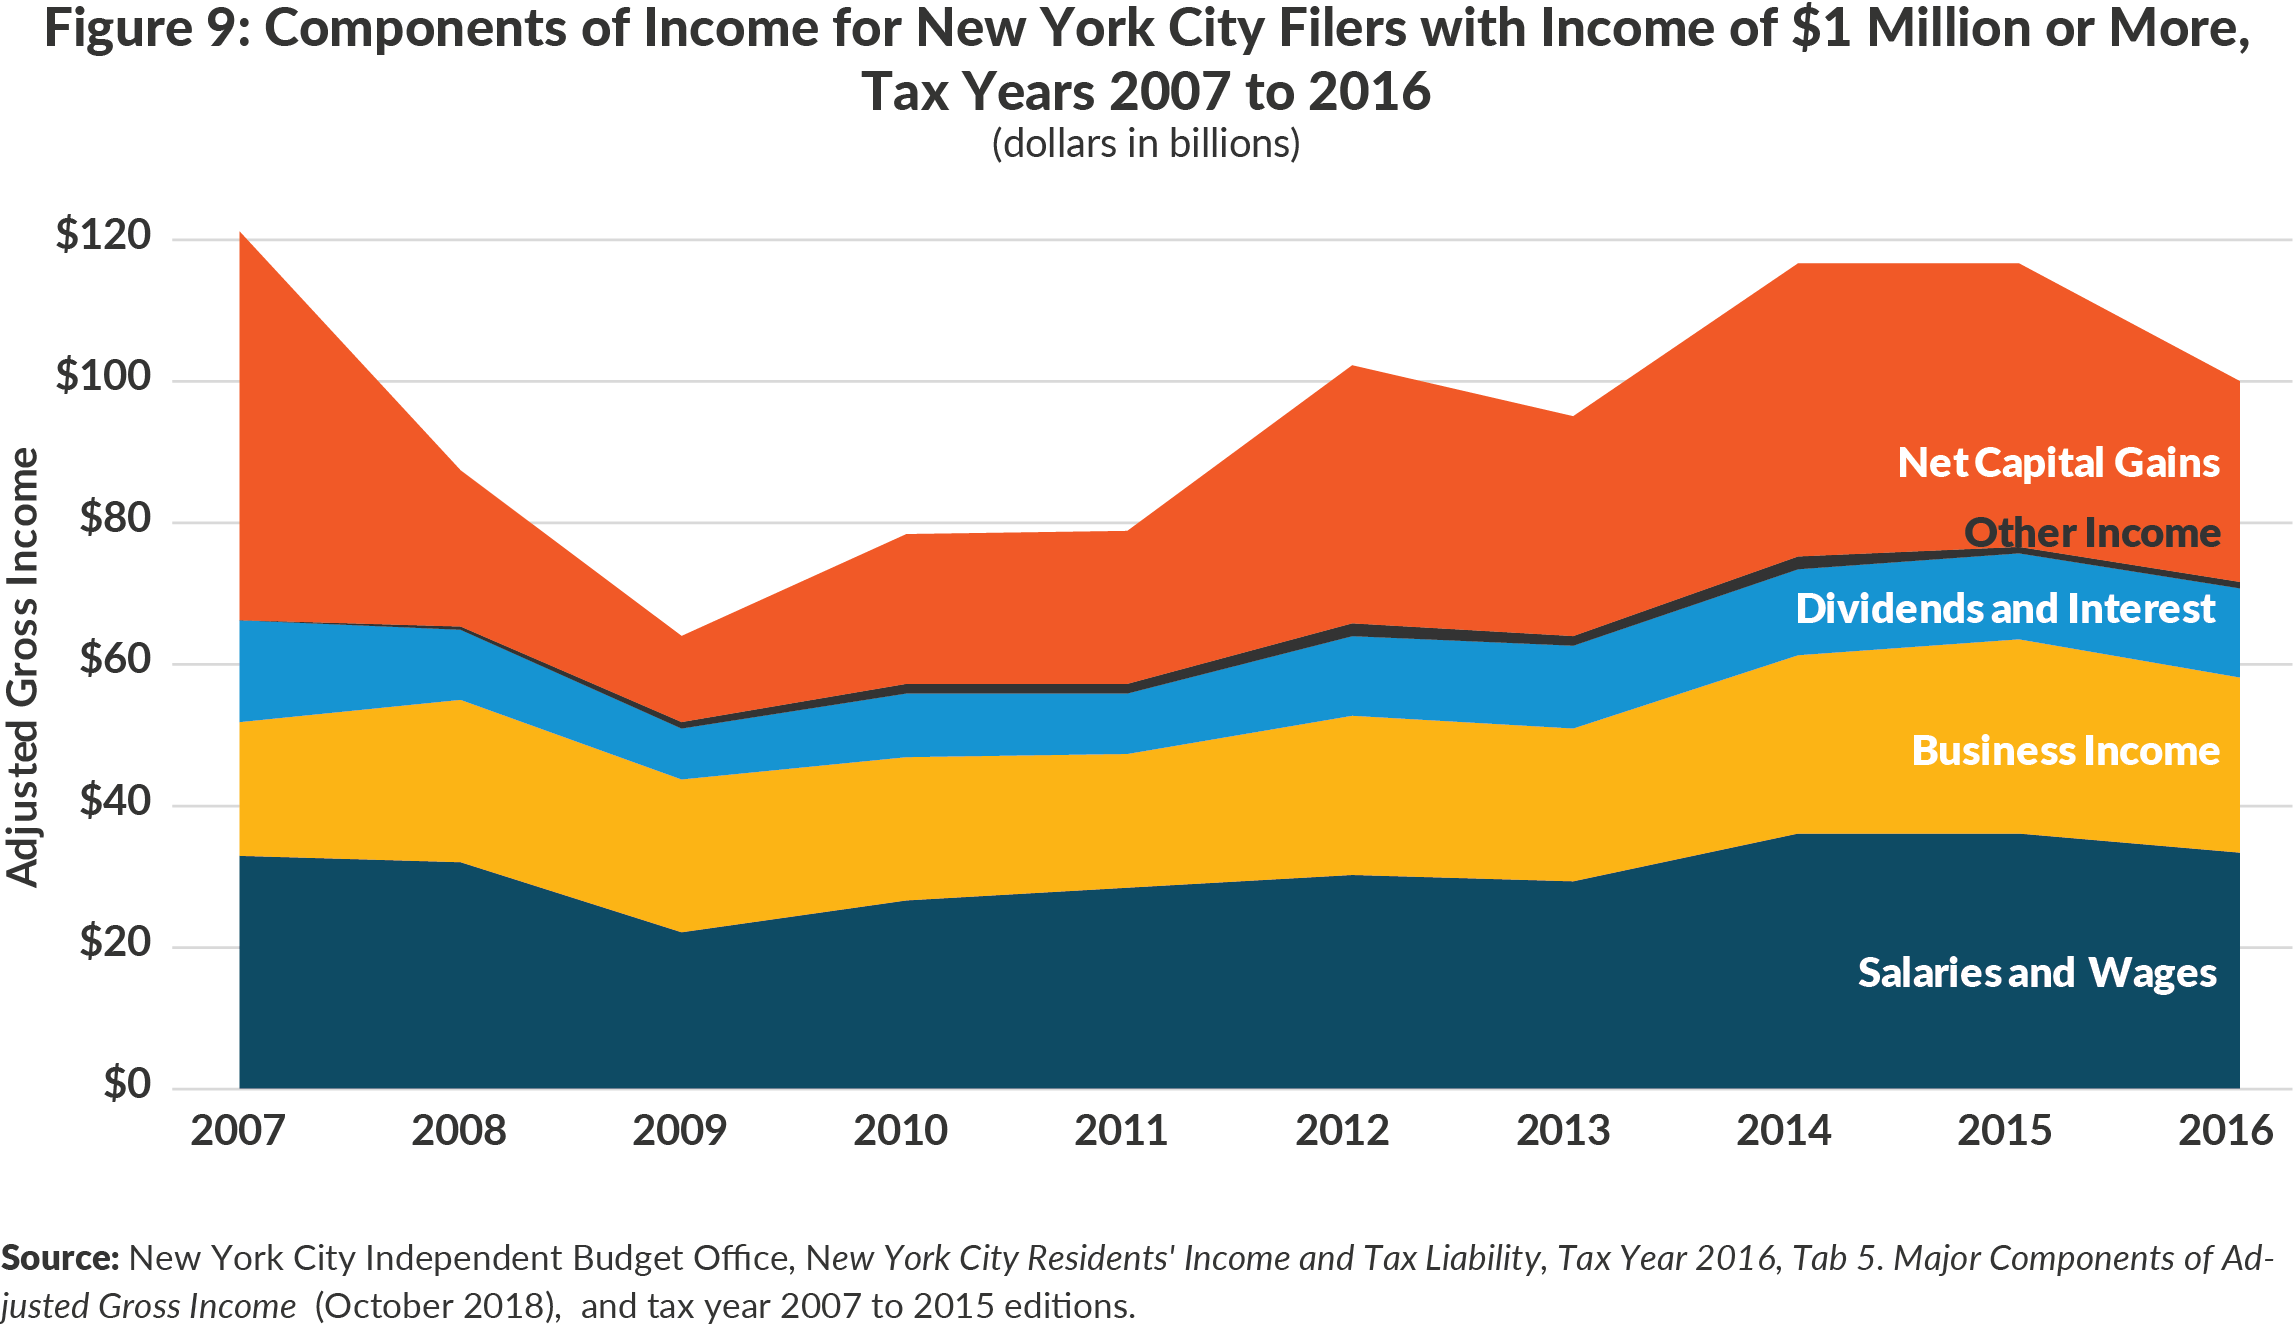 Figure 9: Components of Income for New York City Filers with Income Over $1 Million,Tax Years 2007 to 2016